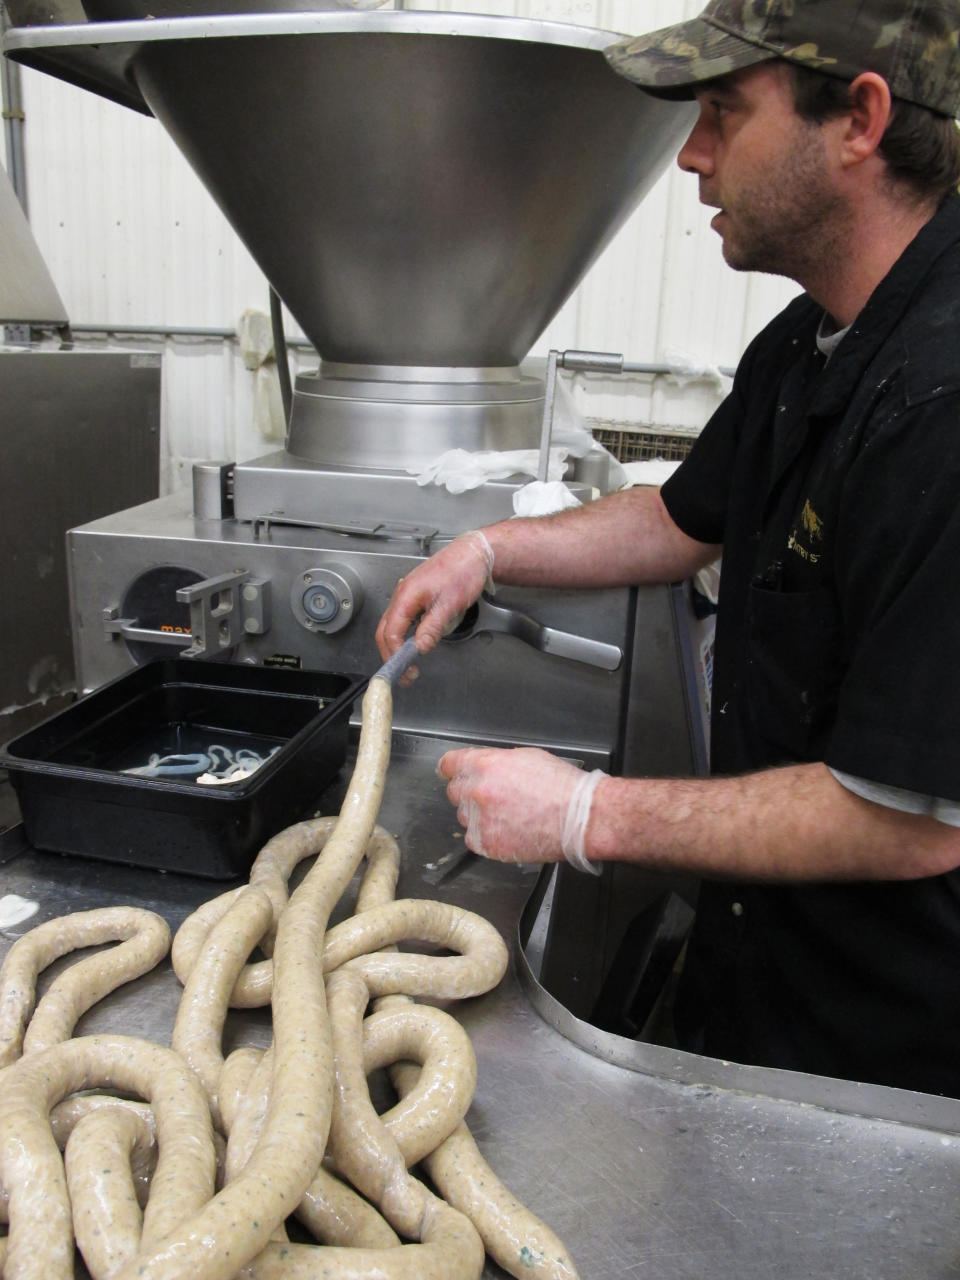 In this Wednesday, April 10, 2013 photo, processing department manager Chris Cote at the Country Store market handles boudin as it comes out of sausage making machine in Pennsdale, Pa. The sausage is popular in Louisiana. An influx of workers from the South to fill jobs in the natural gas industry in north-central Pennsylvania has led area catering businesses, restaurants and grocery stores to offer more Southern cuisine like jambalaya and boudin. (AP Photo/Genaro C. Armas)